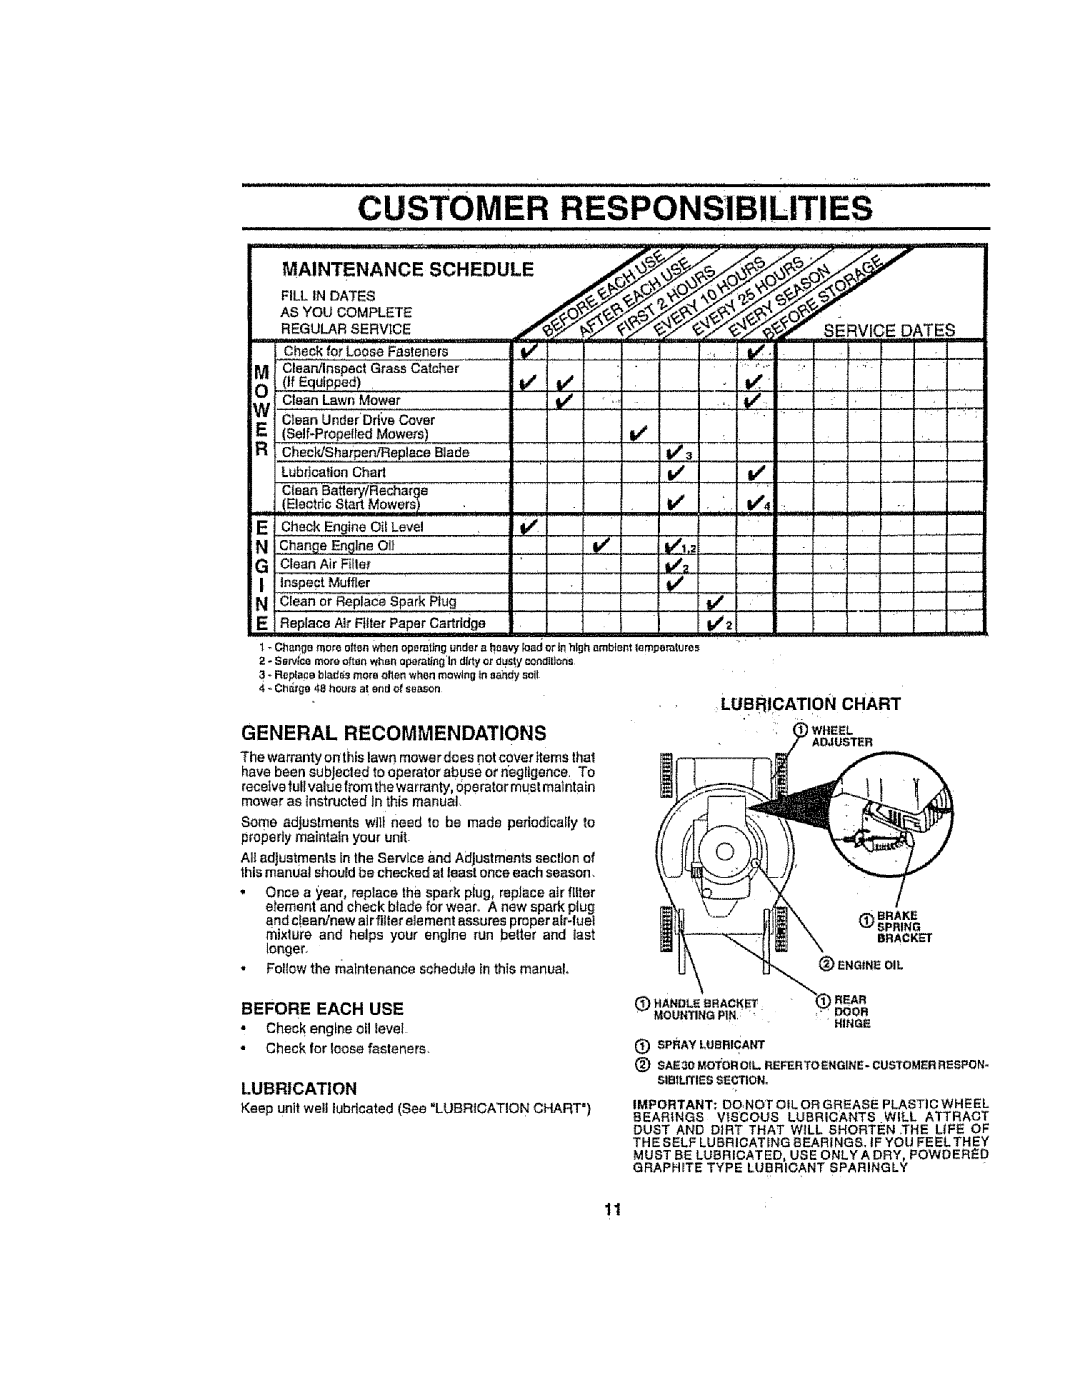 Sears 917386121 owner manual Customer Responsibilities, General, Recommendations, Lubrication Chart, I.UBRICATtON 